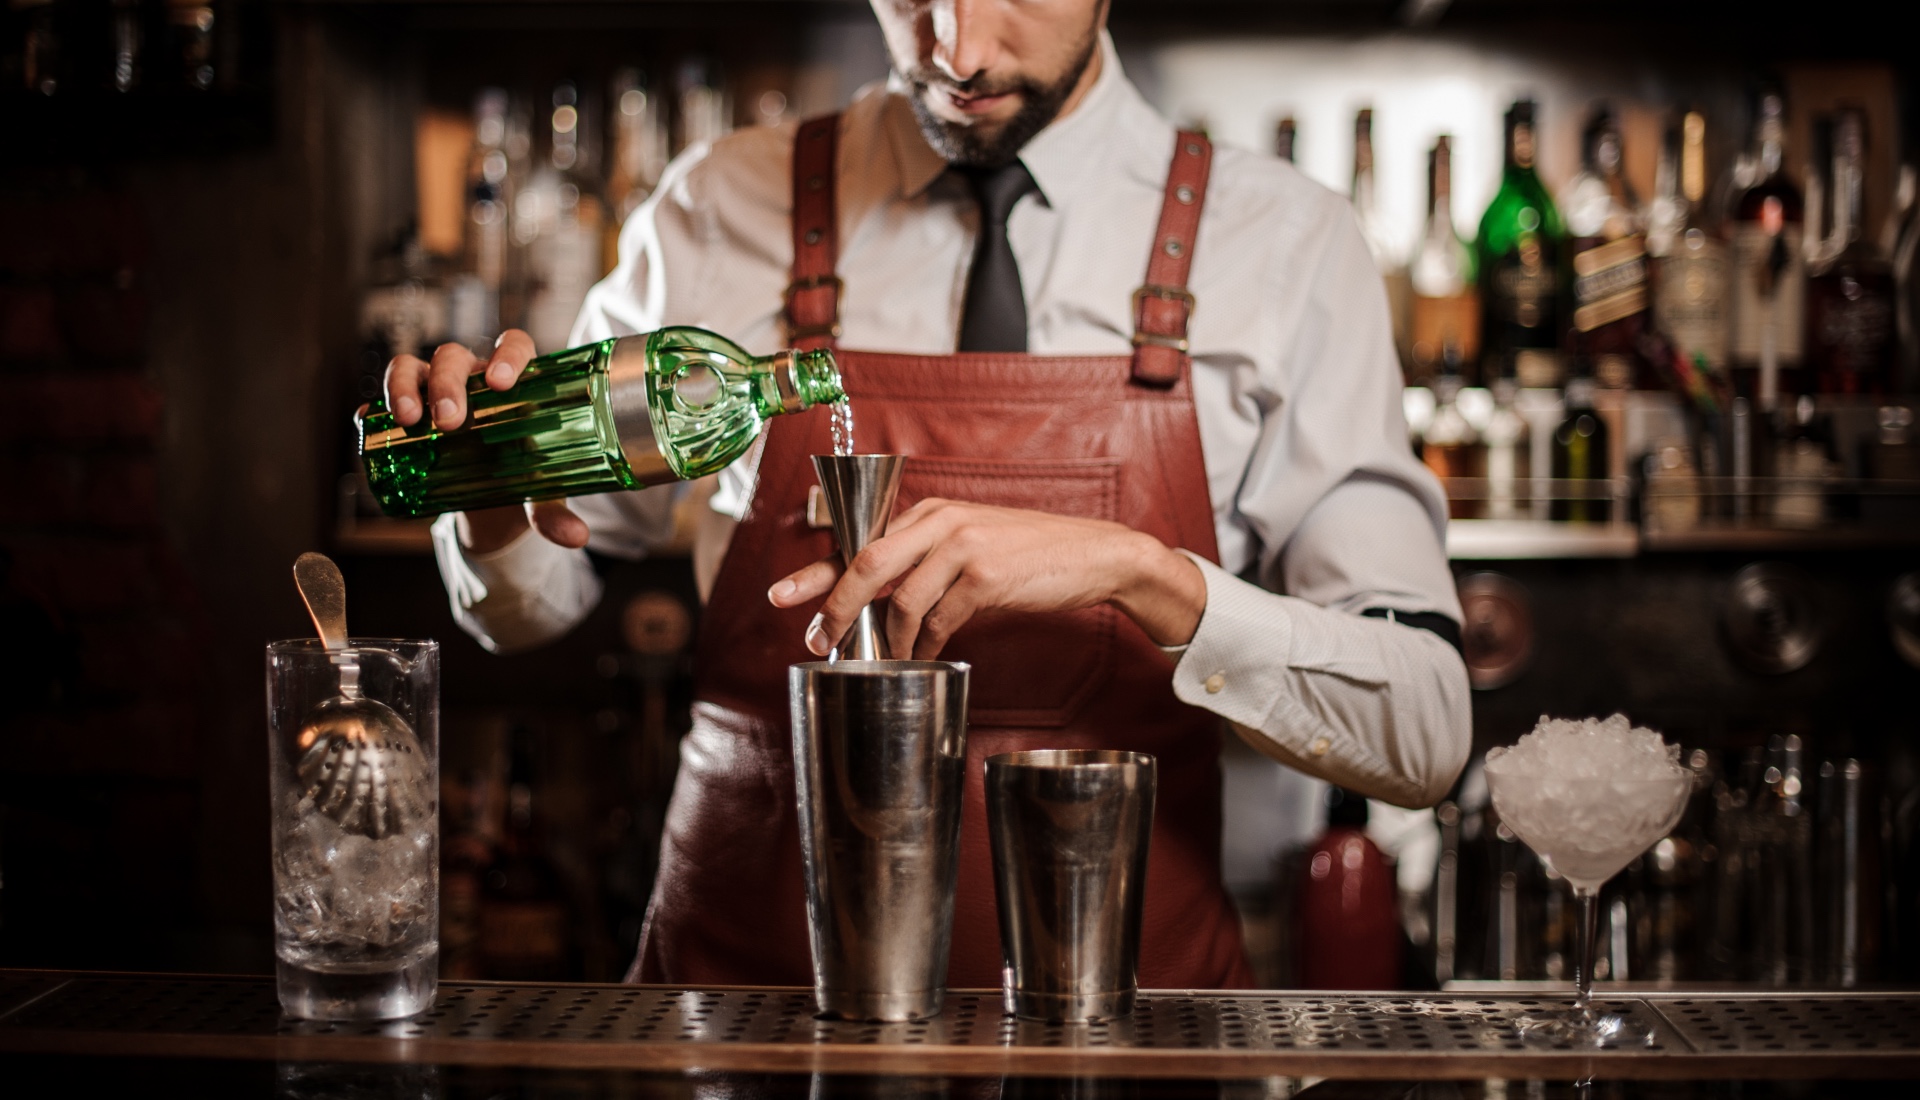 Bartending 101: Essential Techniques, Tips, and Tricks